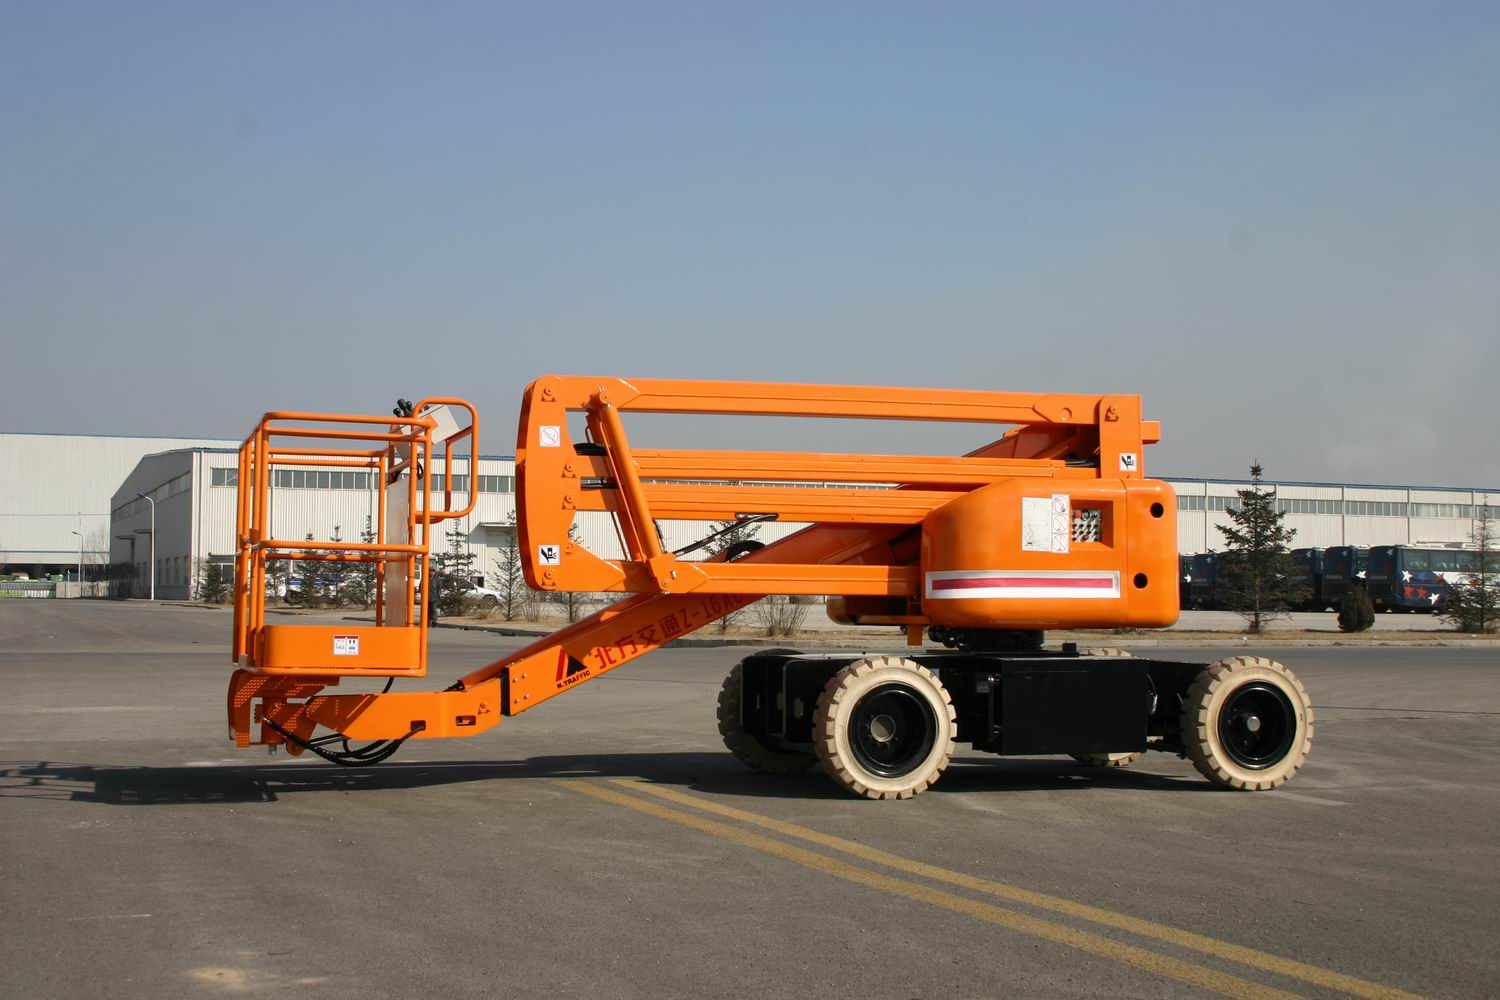 Self-propelled aerial working platform for high place working-16m